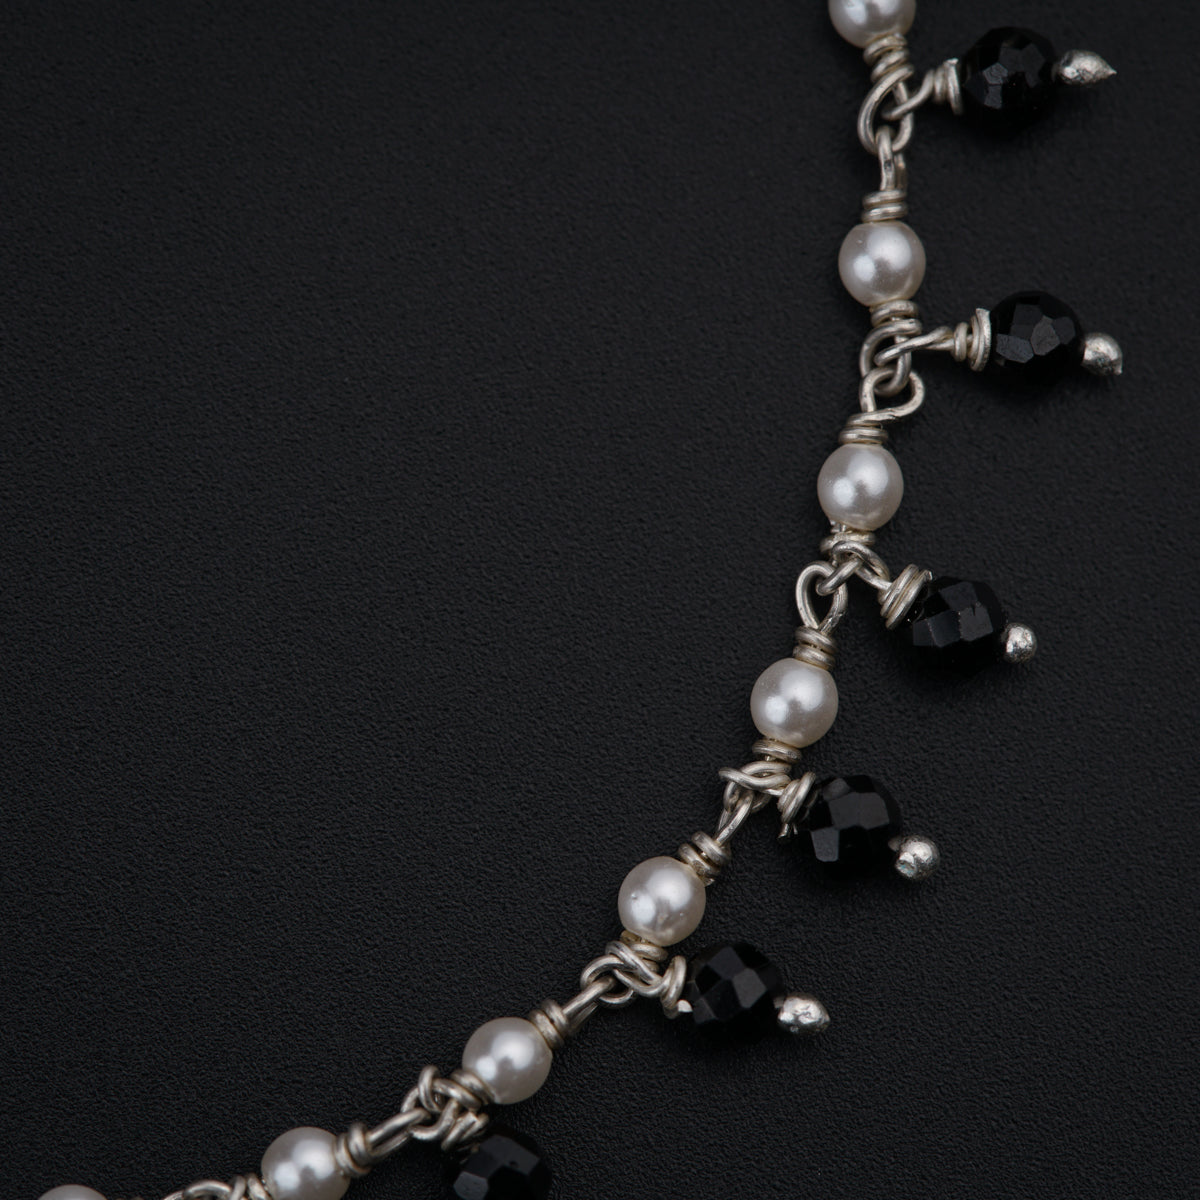 a close up of a necklace with pearls and black beads